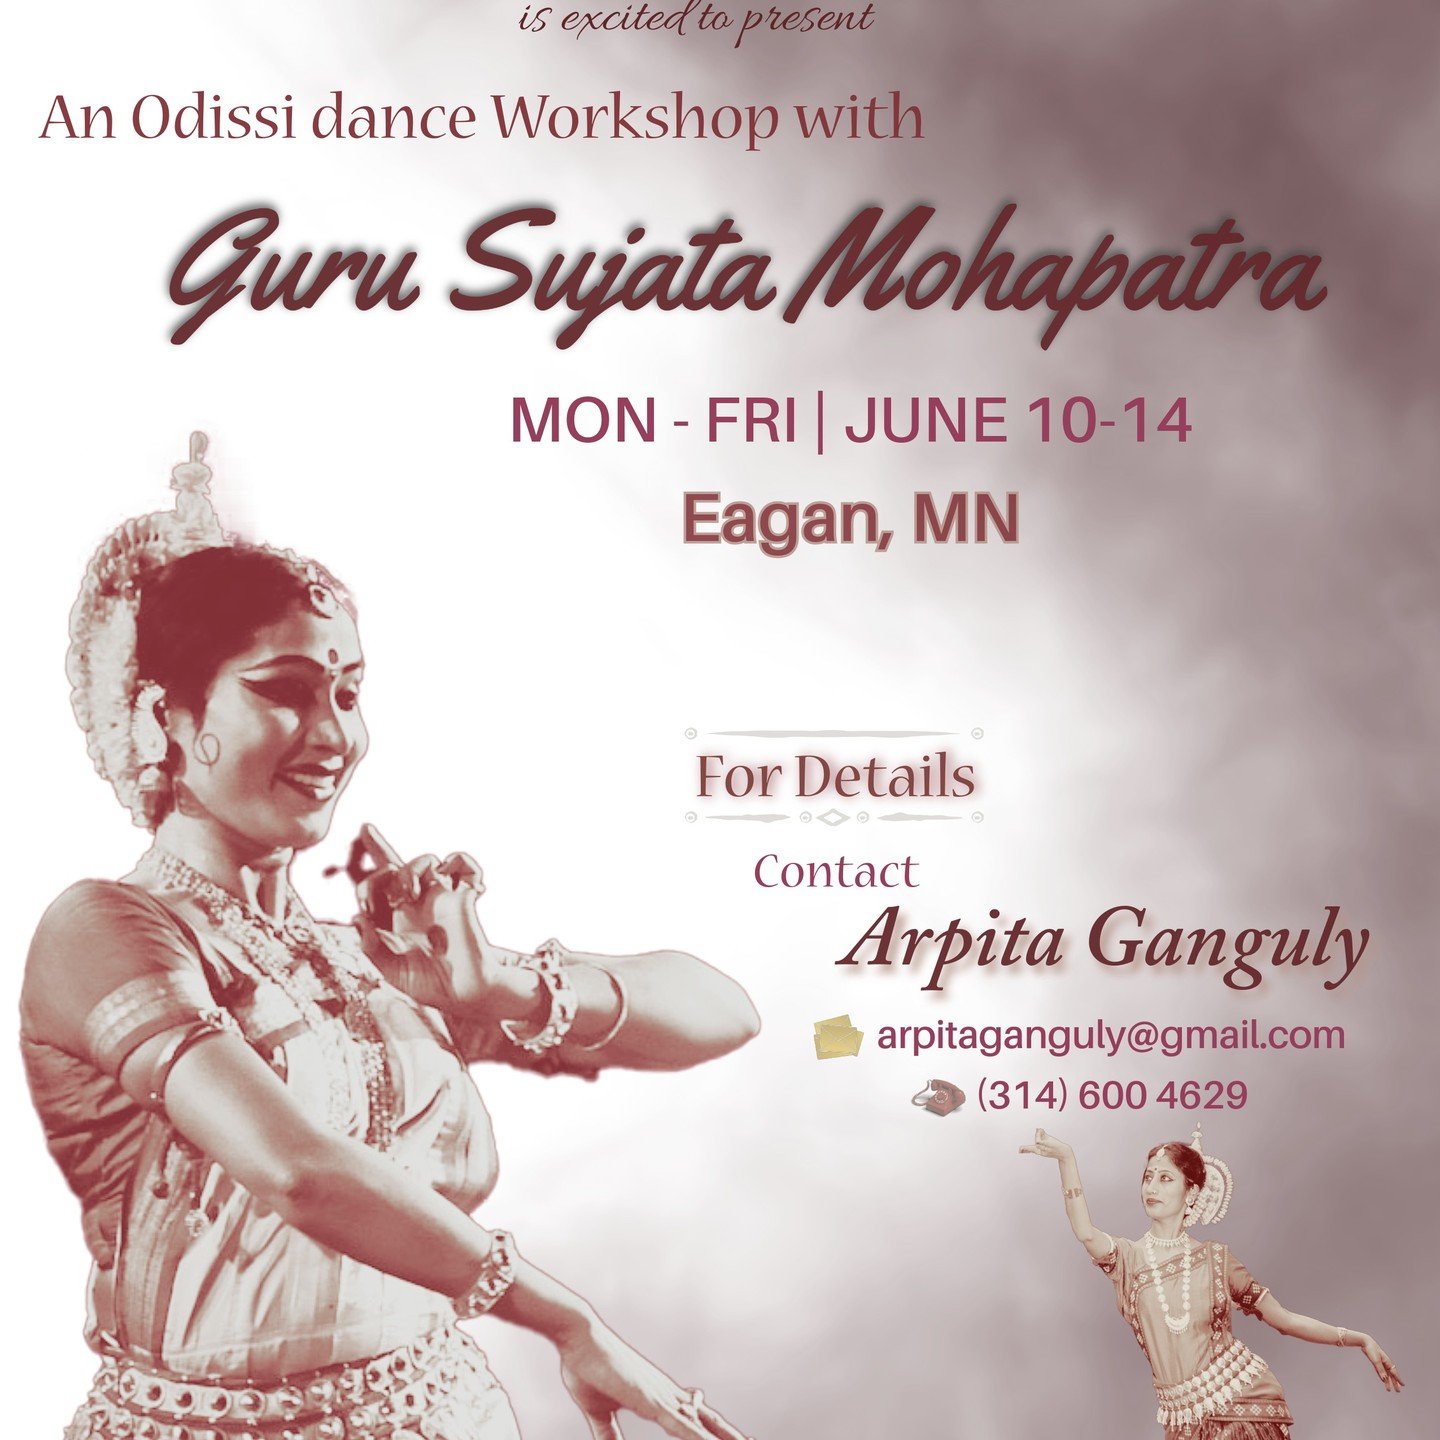 Twin Cities Odissi is organizing a workshop with Guru Sujata Mohapatra from Monday, June 10th to Friday, June 14th in Eagan, Minnesota!

Please contact Arpita Ganguly, arpitaganguly@gmail.com, (314) 600-4629 for more information.